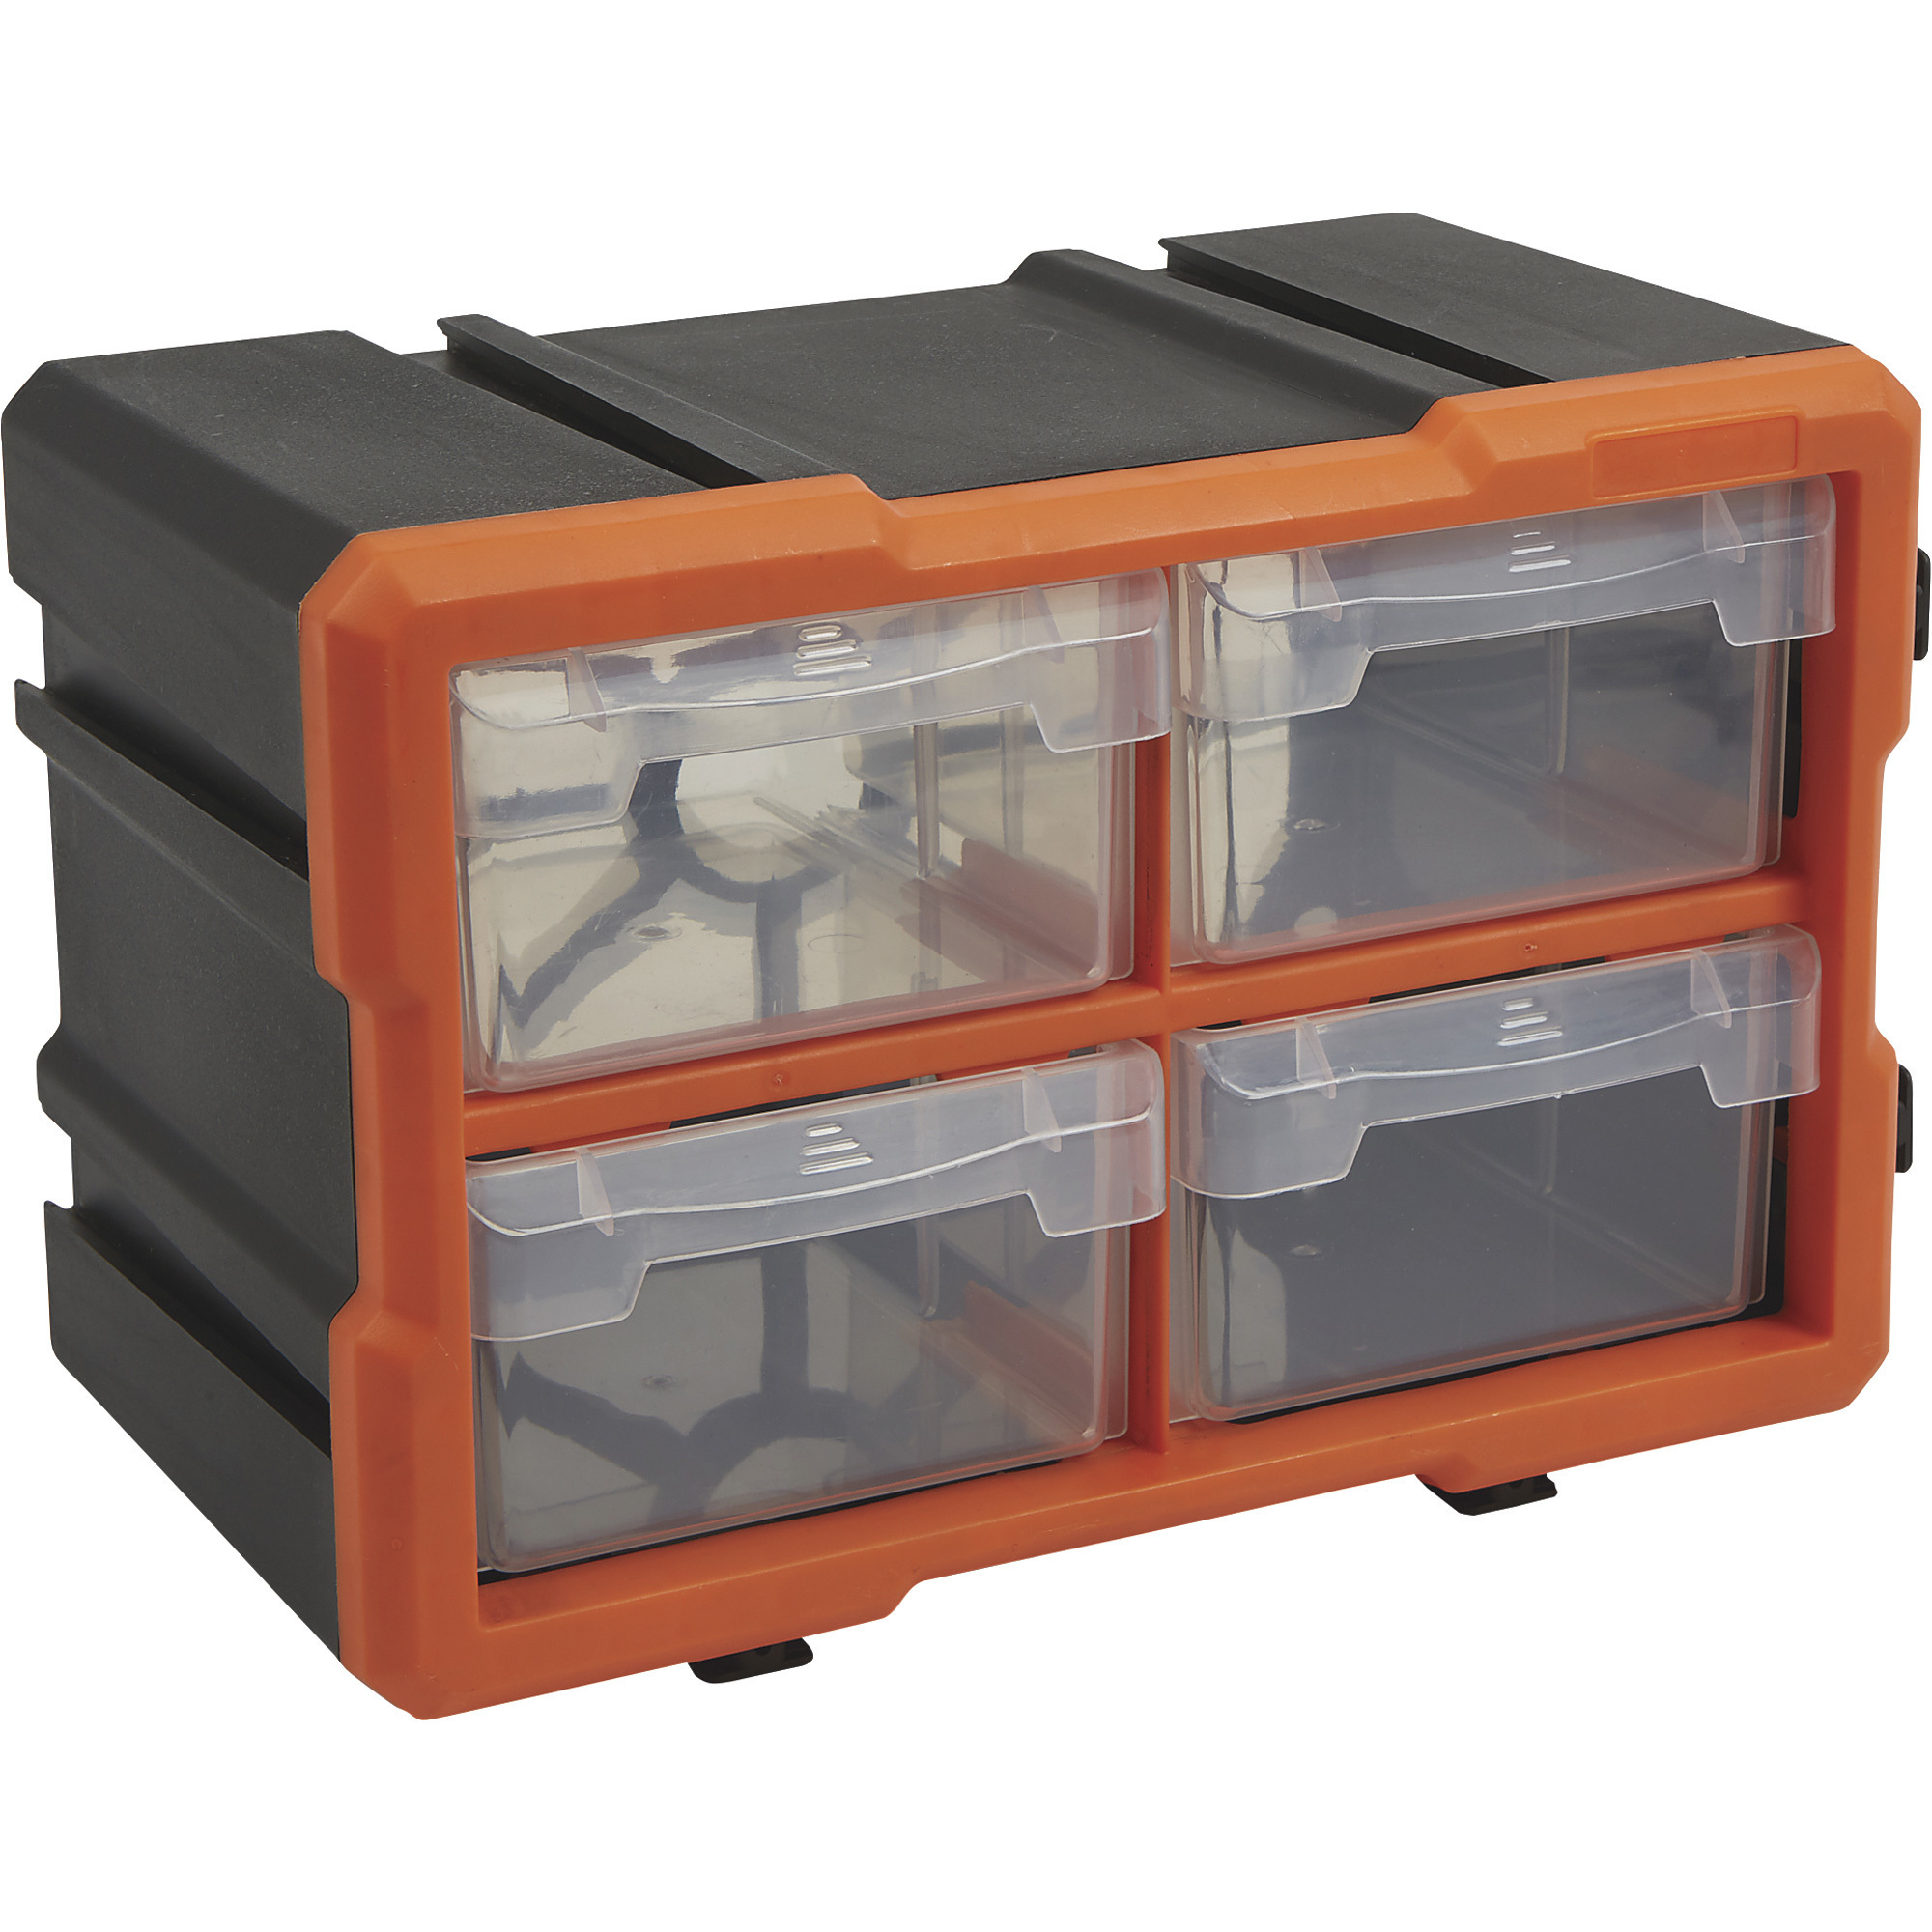 X-Space 4-Drawer Stackable Organizer, 11 5/8Inch W x 7 3/4Inch D x 6 5/16Inch H